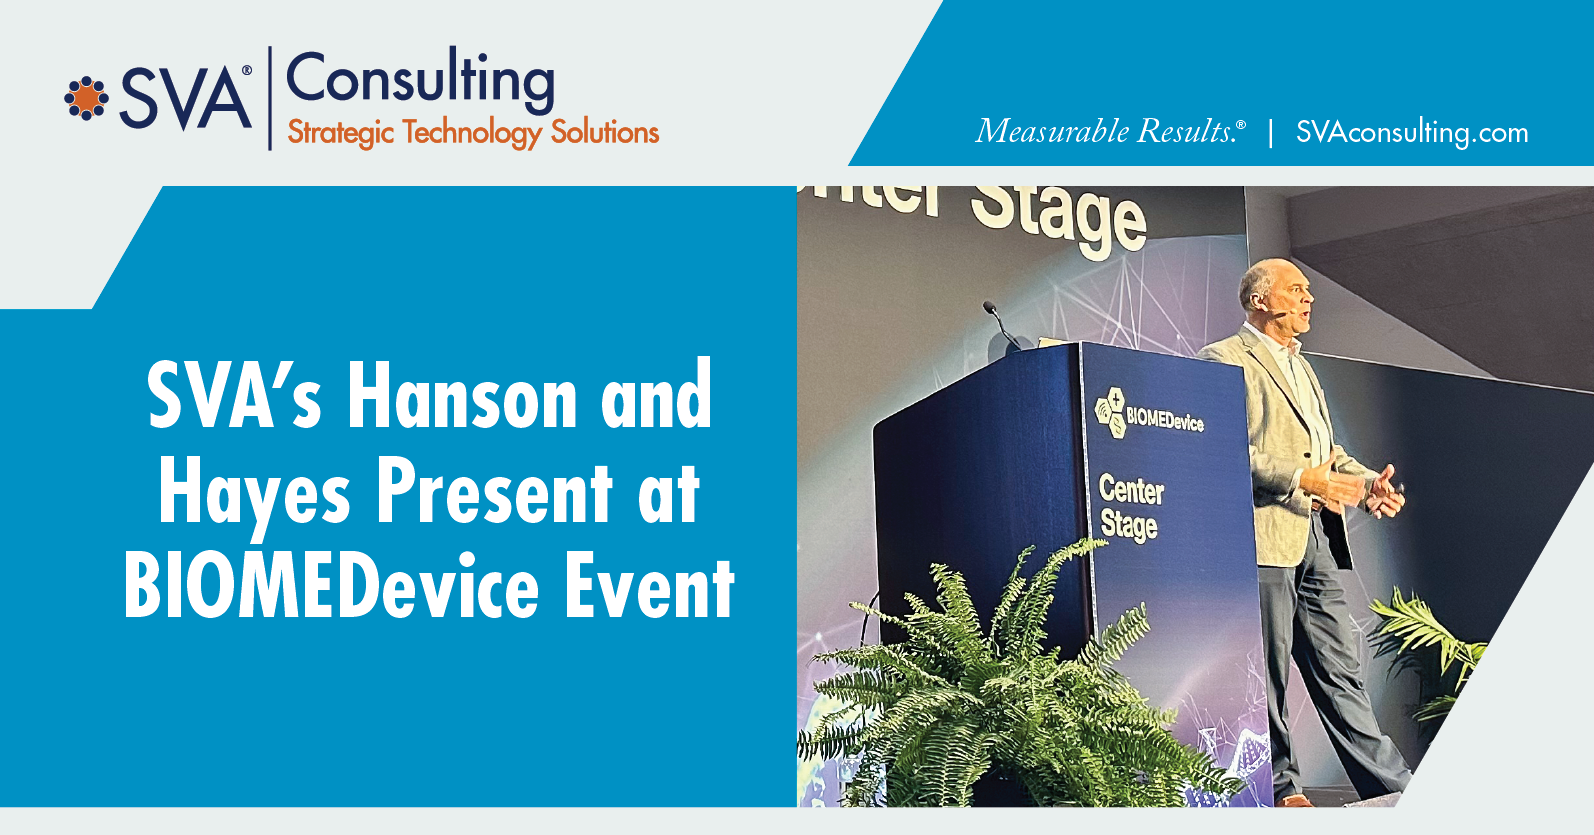 SVA’s Hanson and Hayes Present at BIOMEDevice Event